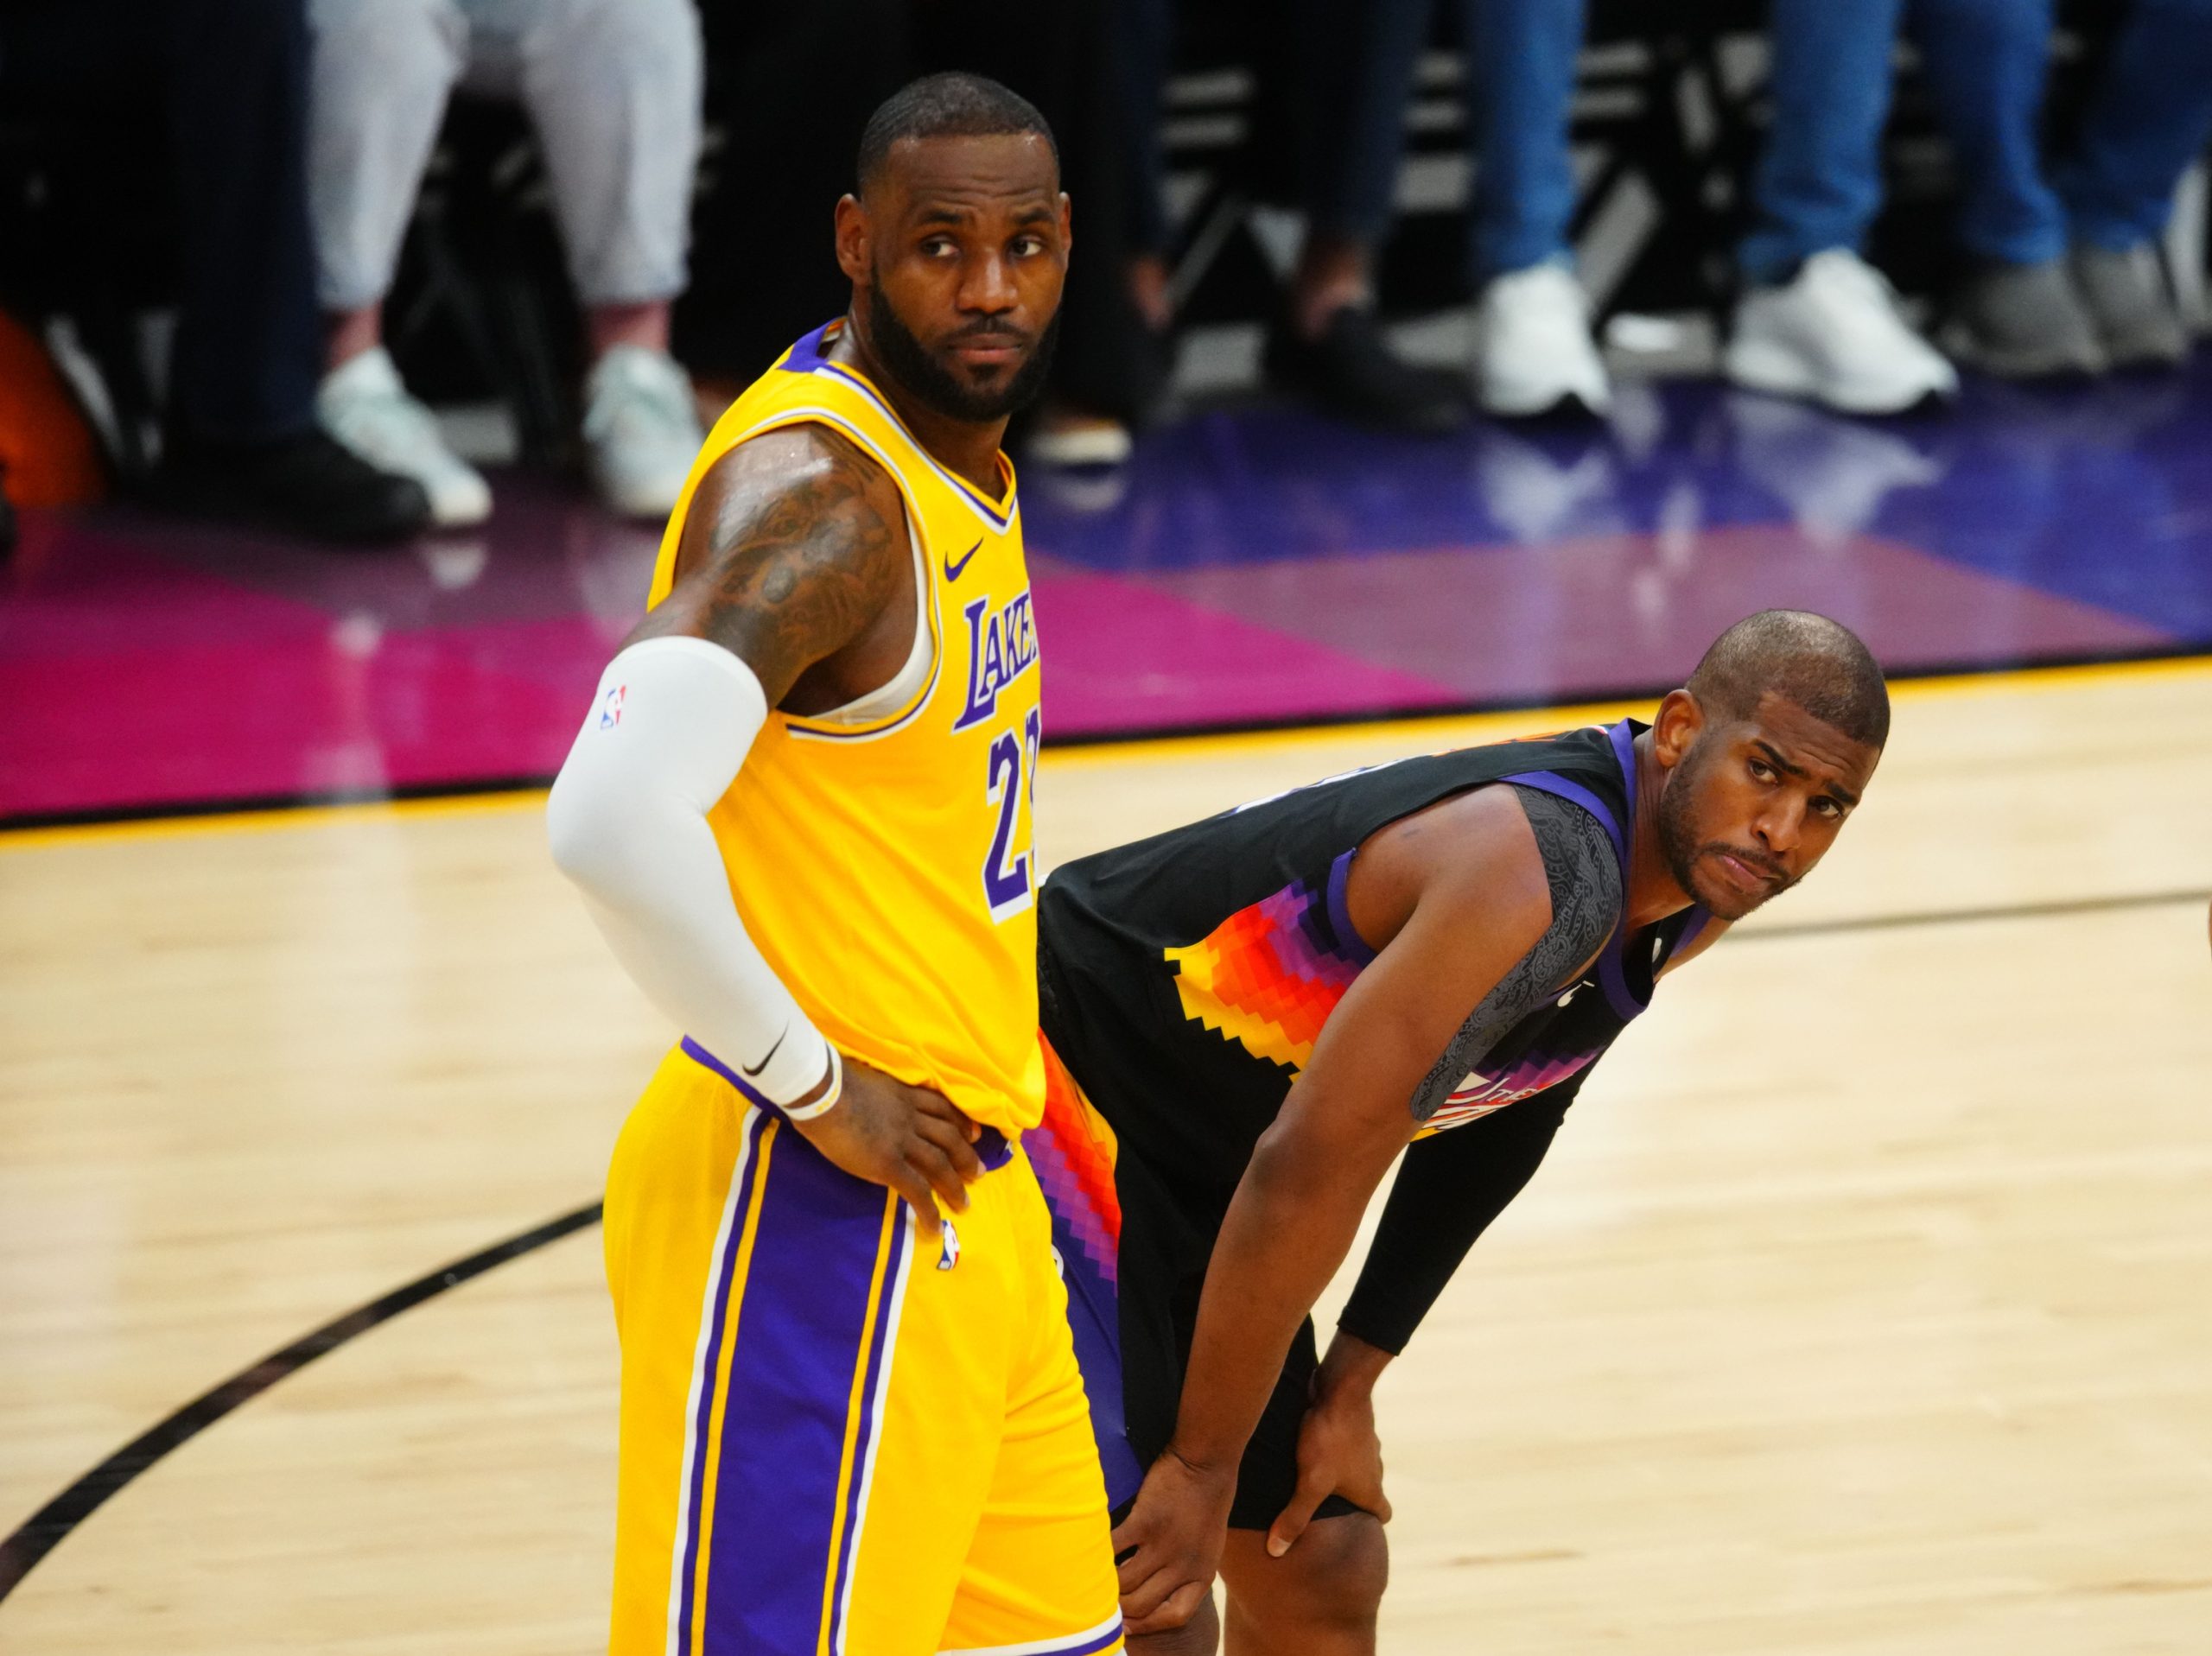 May 25, 2021; Phoenix, Arizona, USA; Los Angeles Lakers forward LeBron James (left) alongside Phoenix Suns guard Chris Paul during the second half in game two of the first round of the 2021 NBA Playoffs at Phoenix Suns Arena. Mandatory Credit: Mark J. Rebilas-USA TODAY Sports